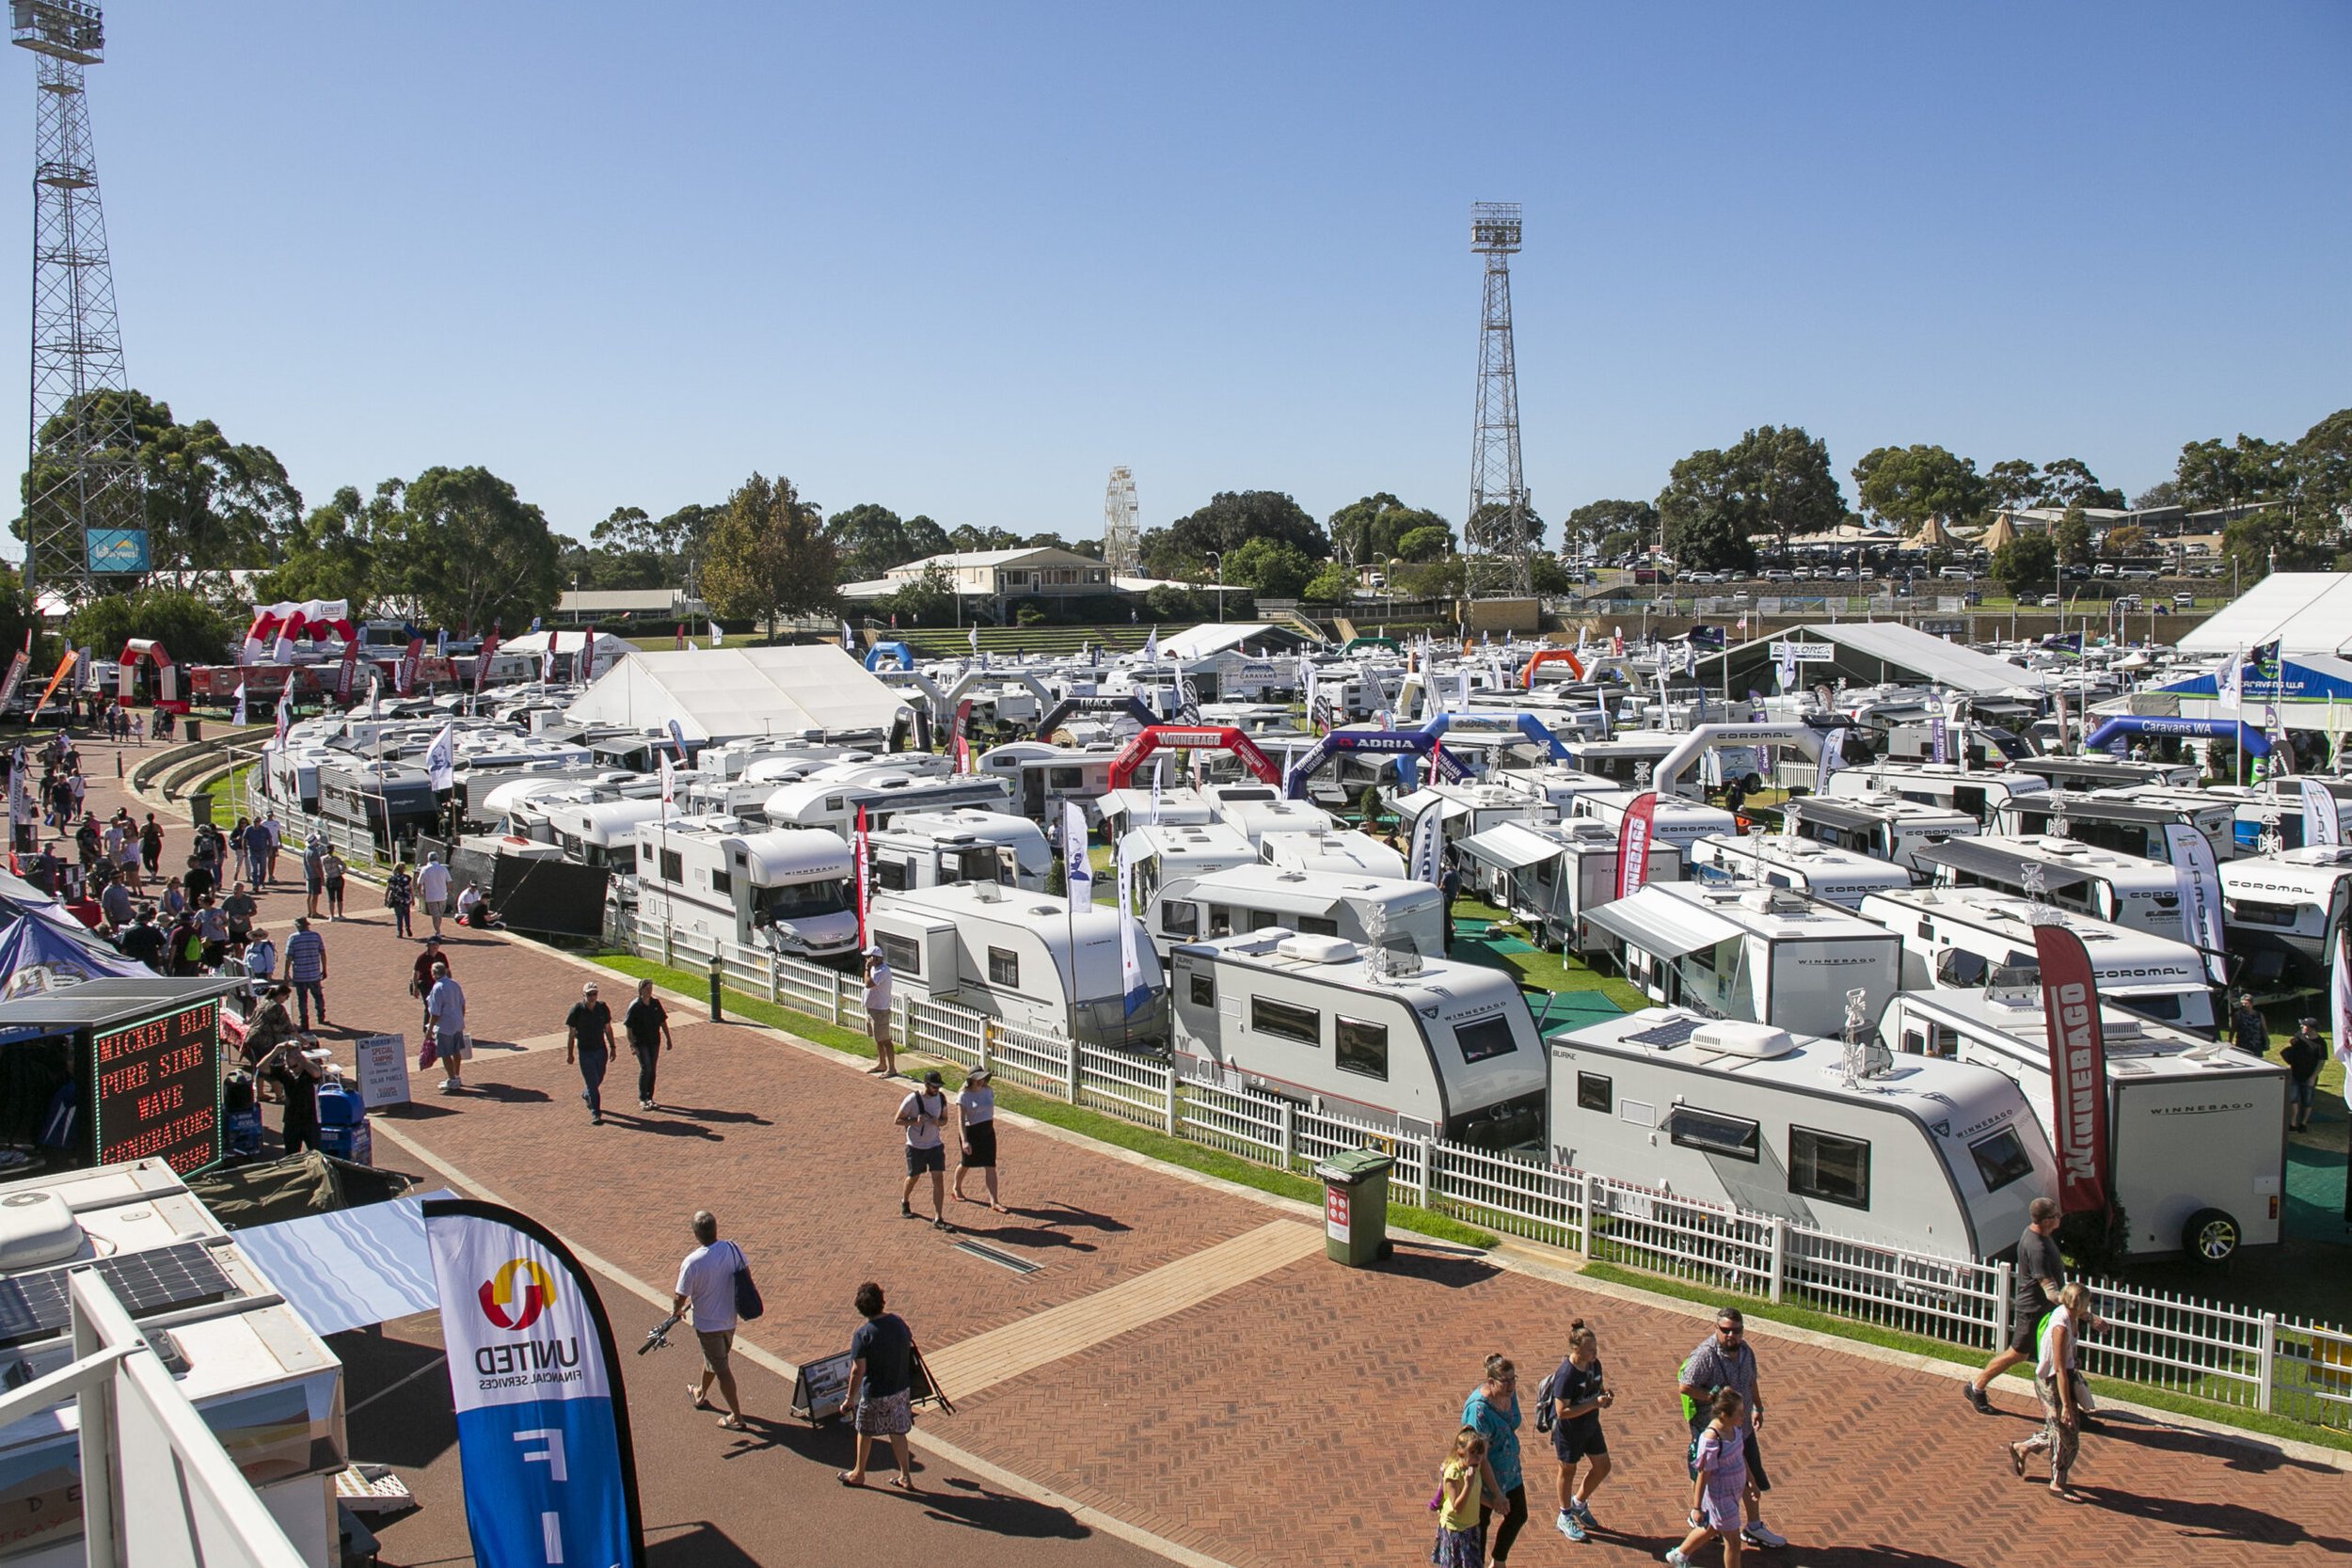 1-Feature-Perth-Caravan-and-Camping-Show-scaled.jpg